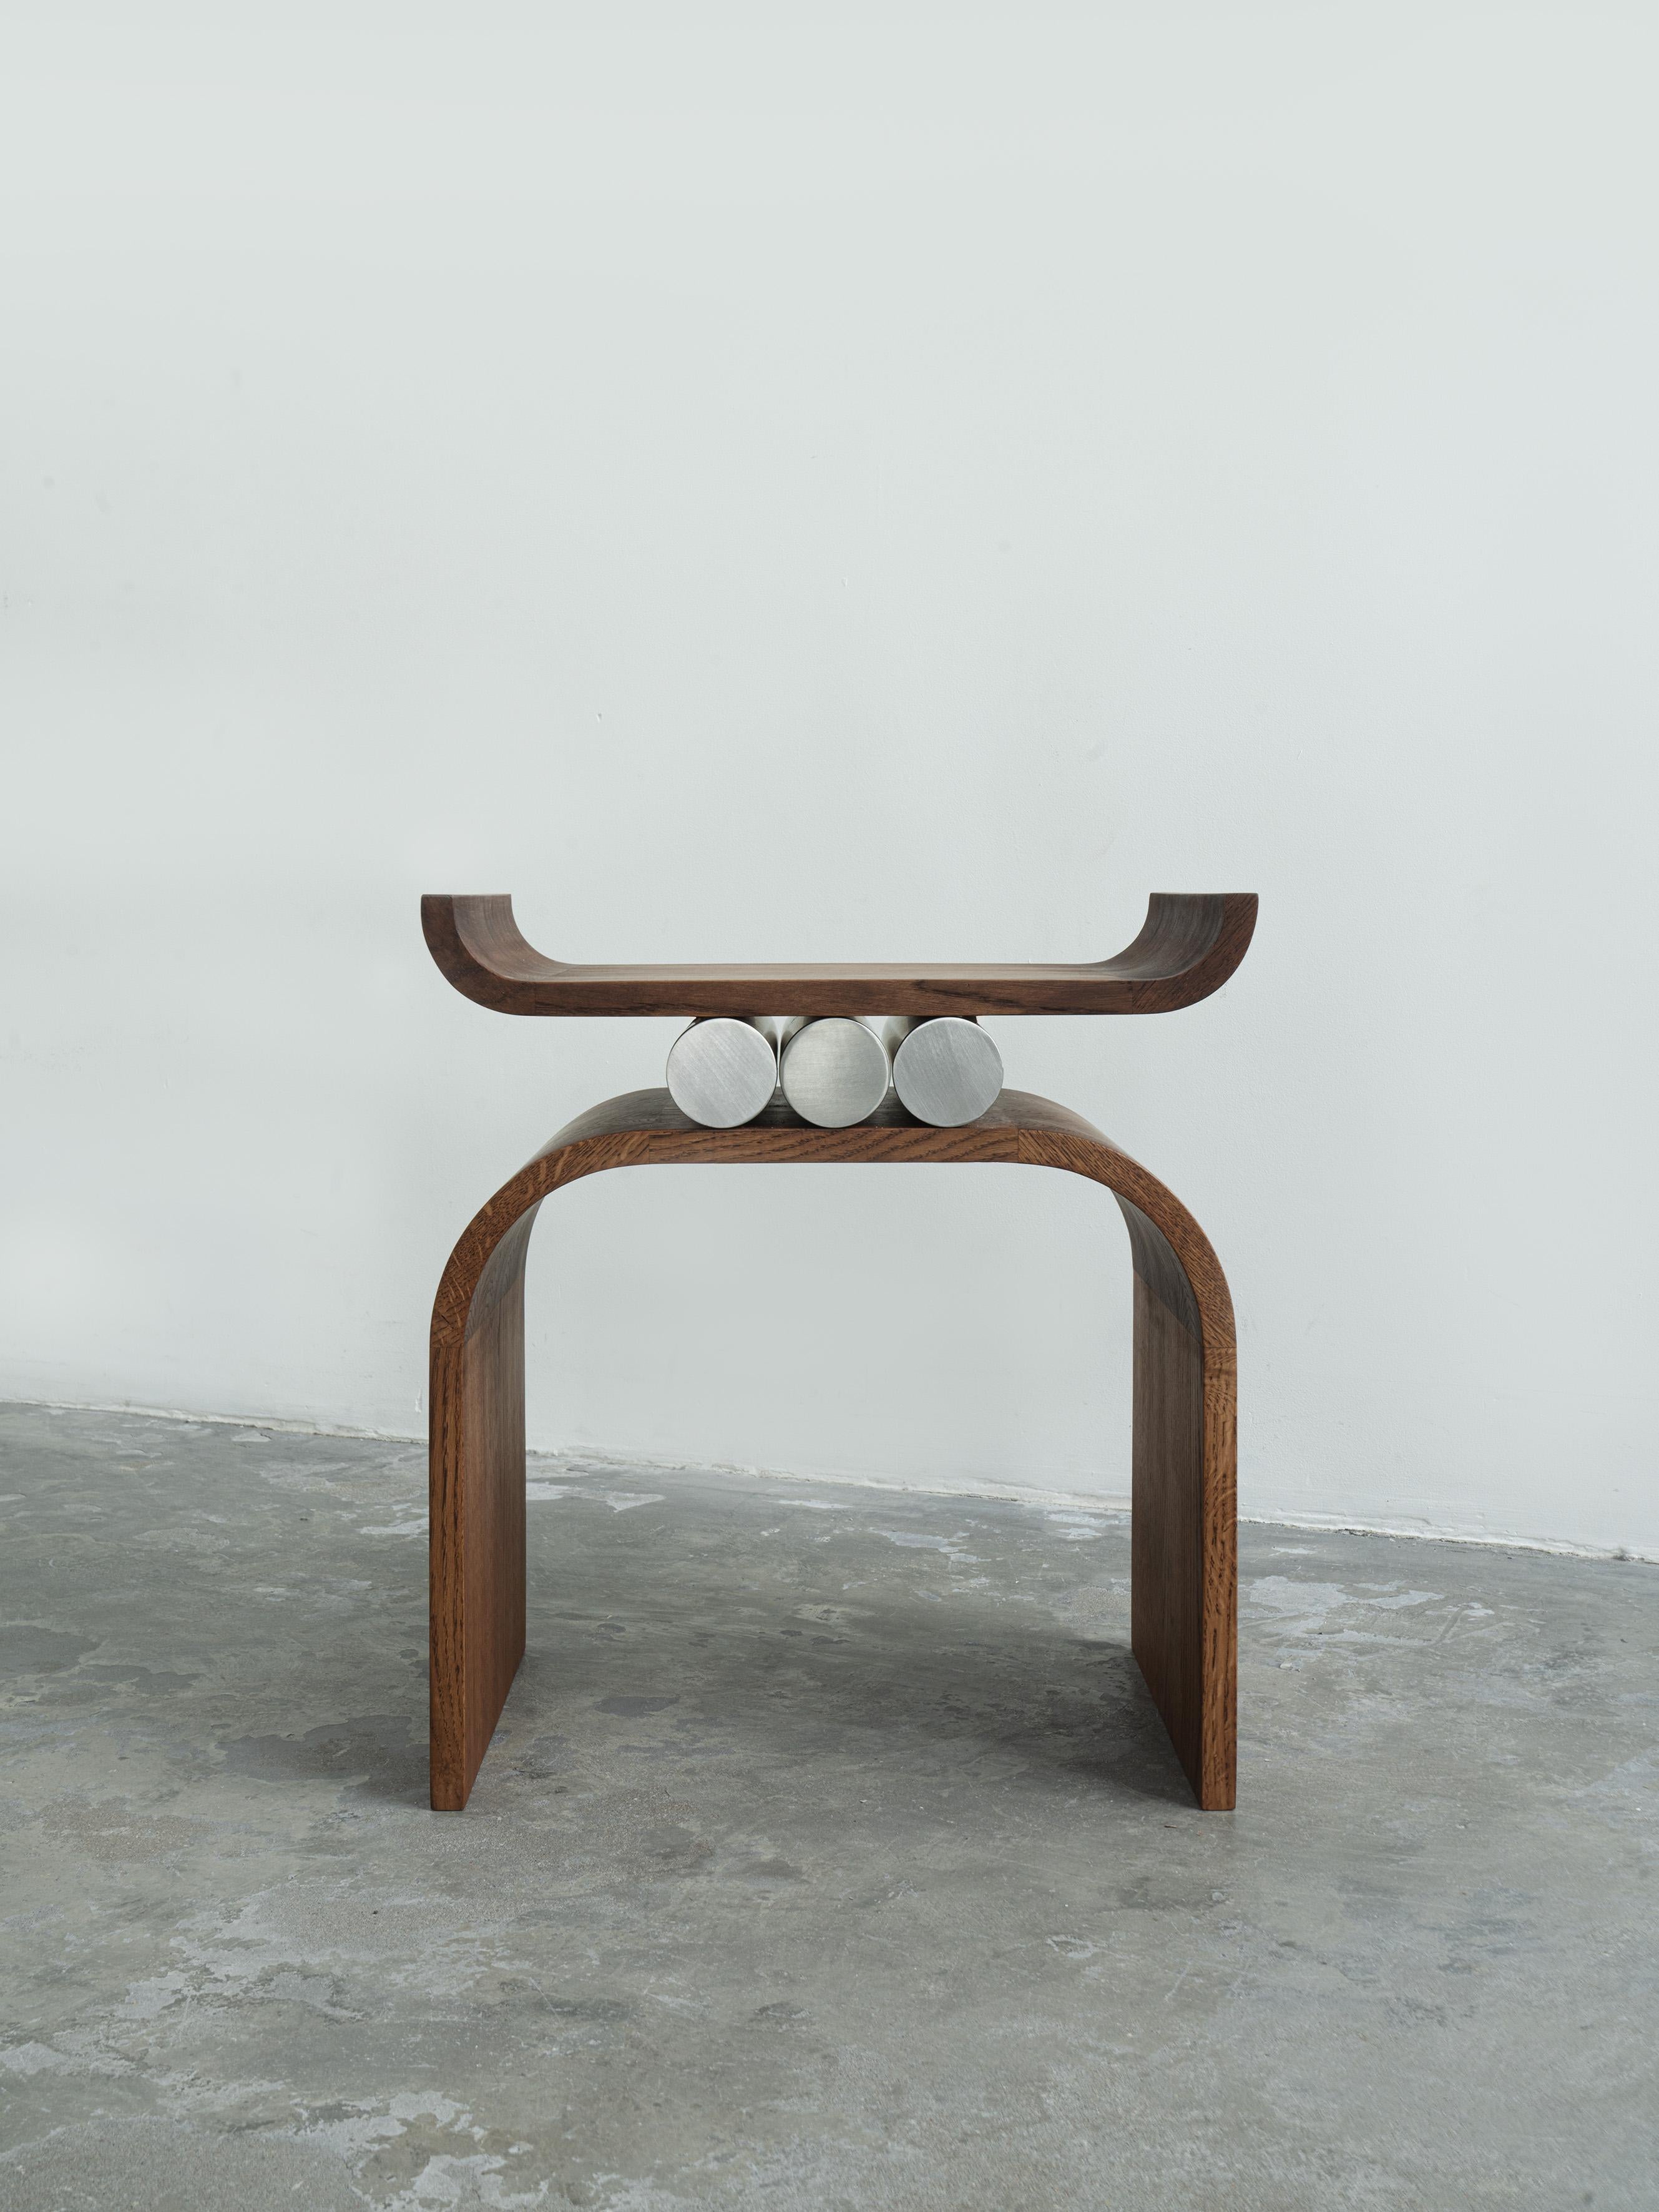 Fuga Stool by Katryna Sadauskaite
Dimensions: W 30 x L 44 x H 45 cm
Materials: Oak Wood, Stainless steel, Wooden parts have hard wax oil finish.

A designer from Lithuania, searching for a balance between function and minimal aesthetics. She